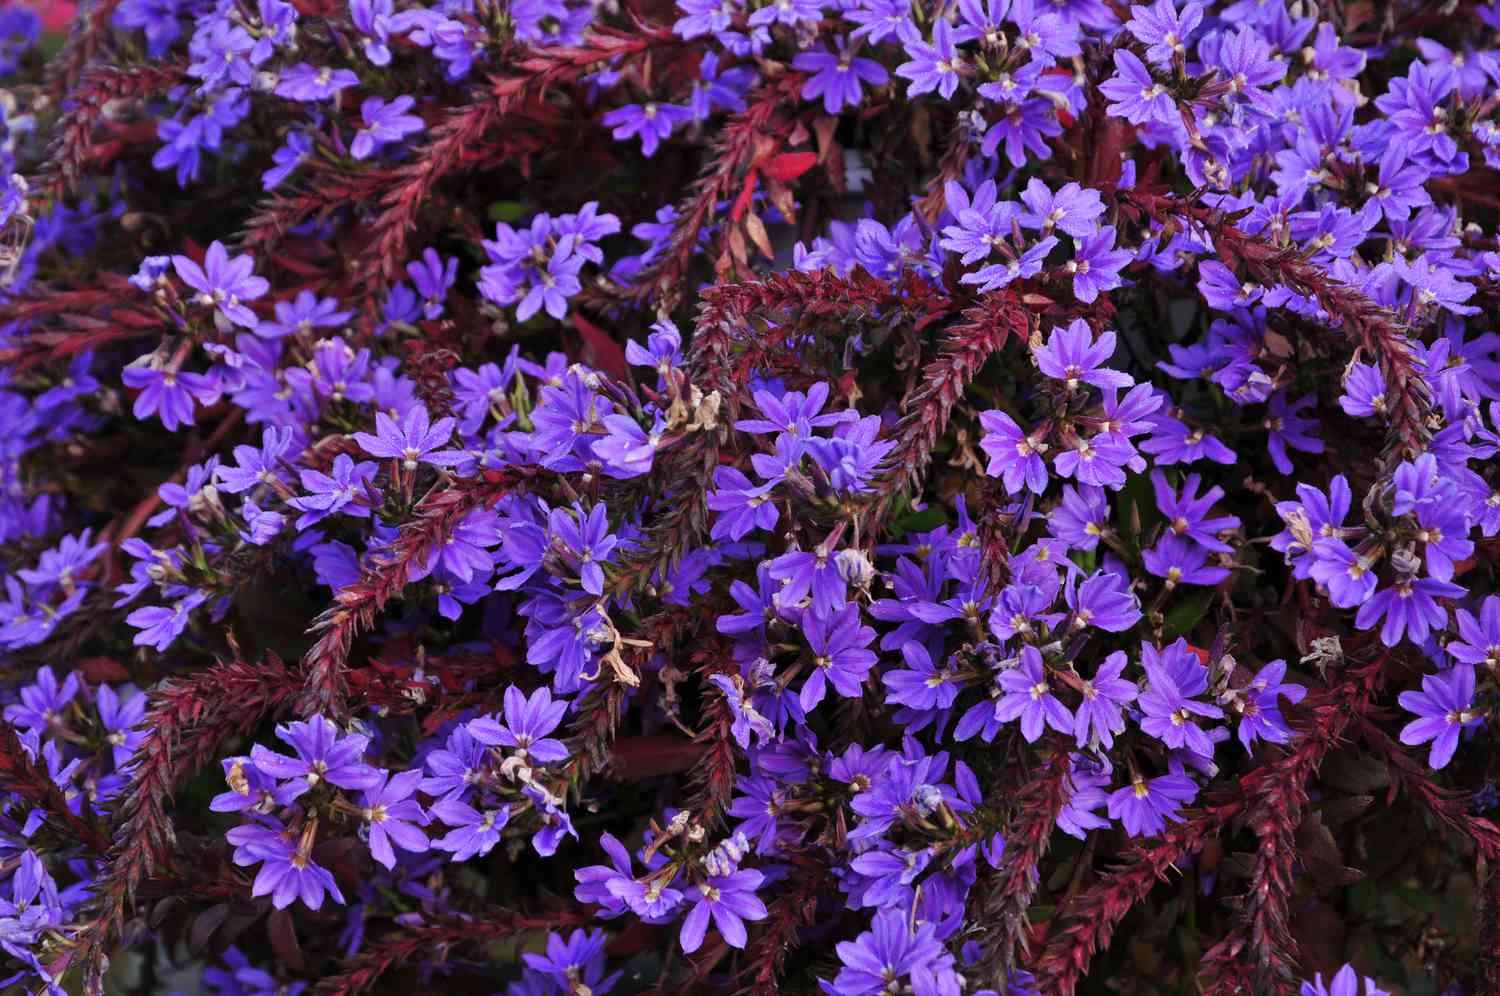 Scaevola plant with dark red bract stems and bright purple flowers